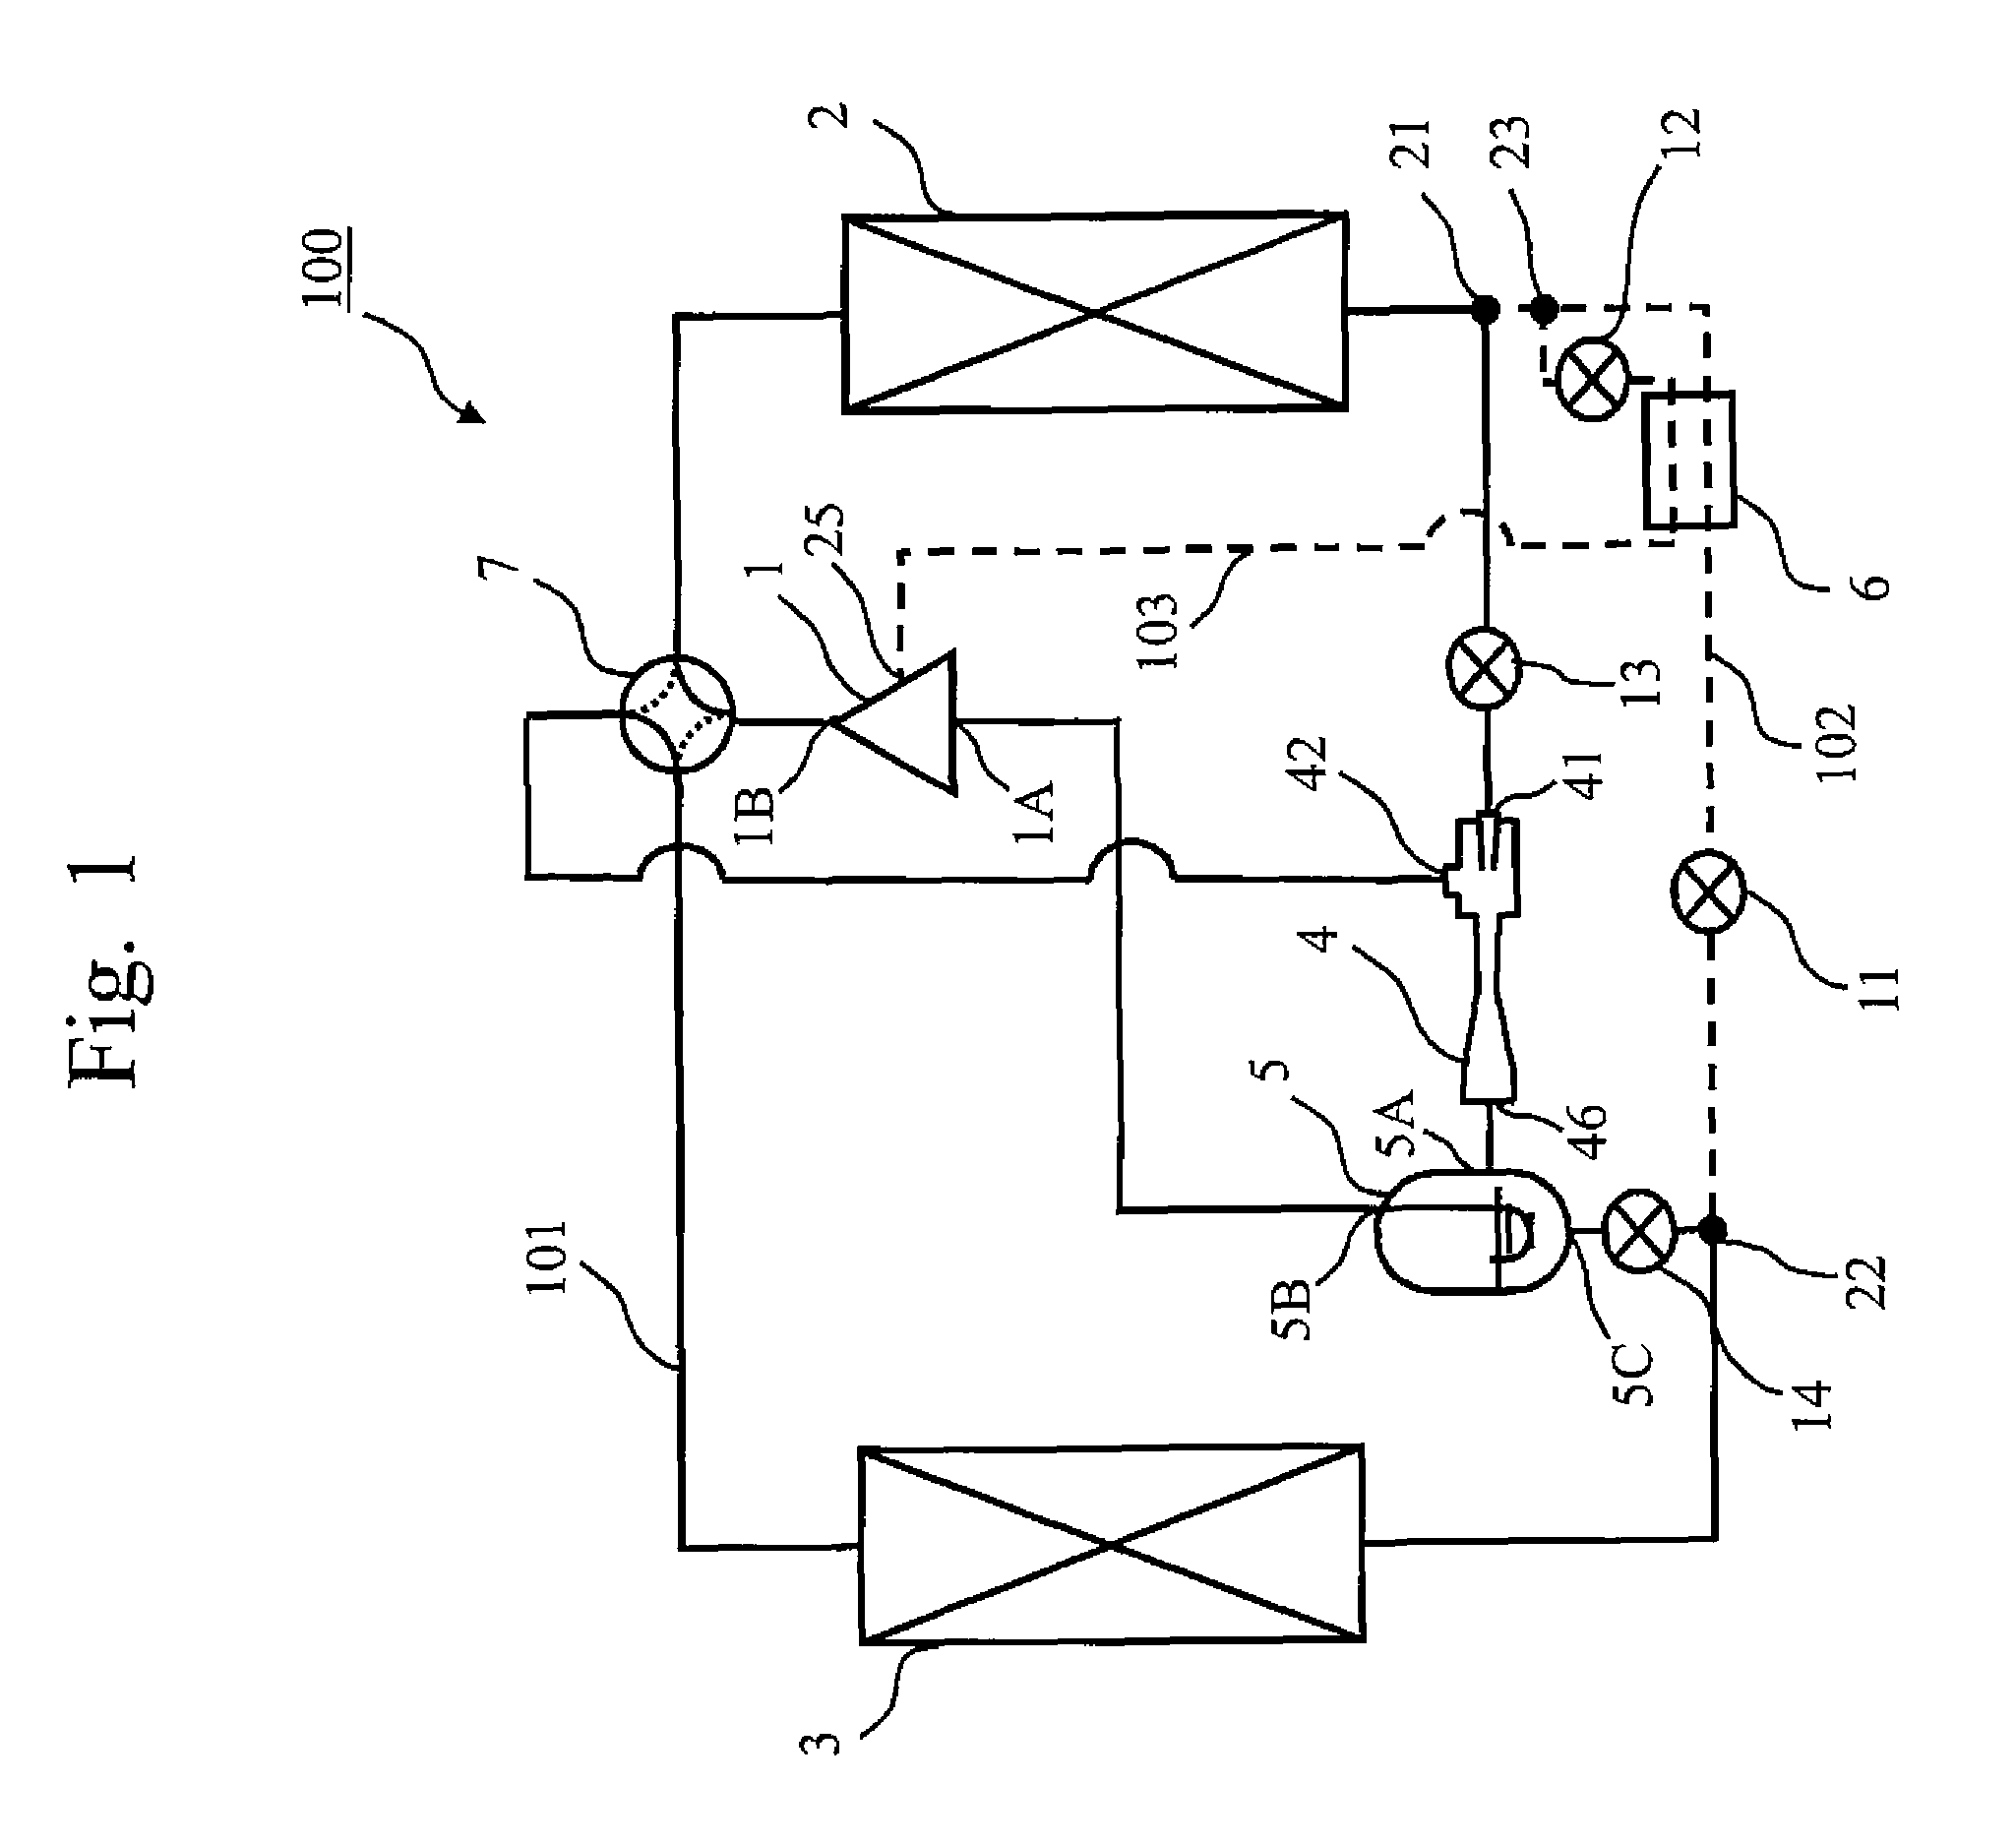 Heat pump apparatus with ejector cycle